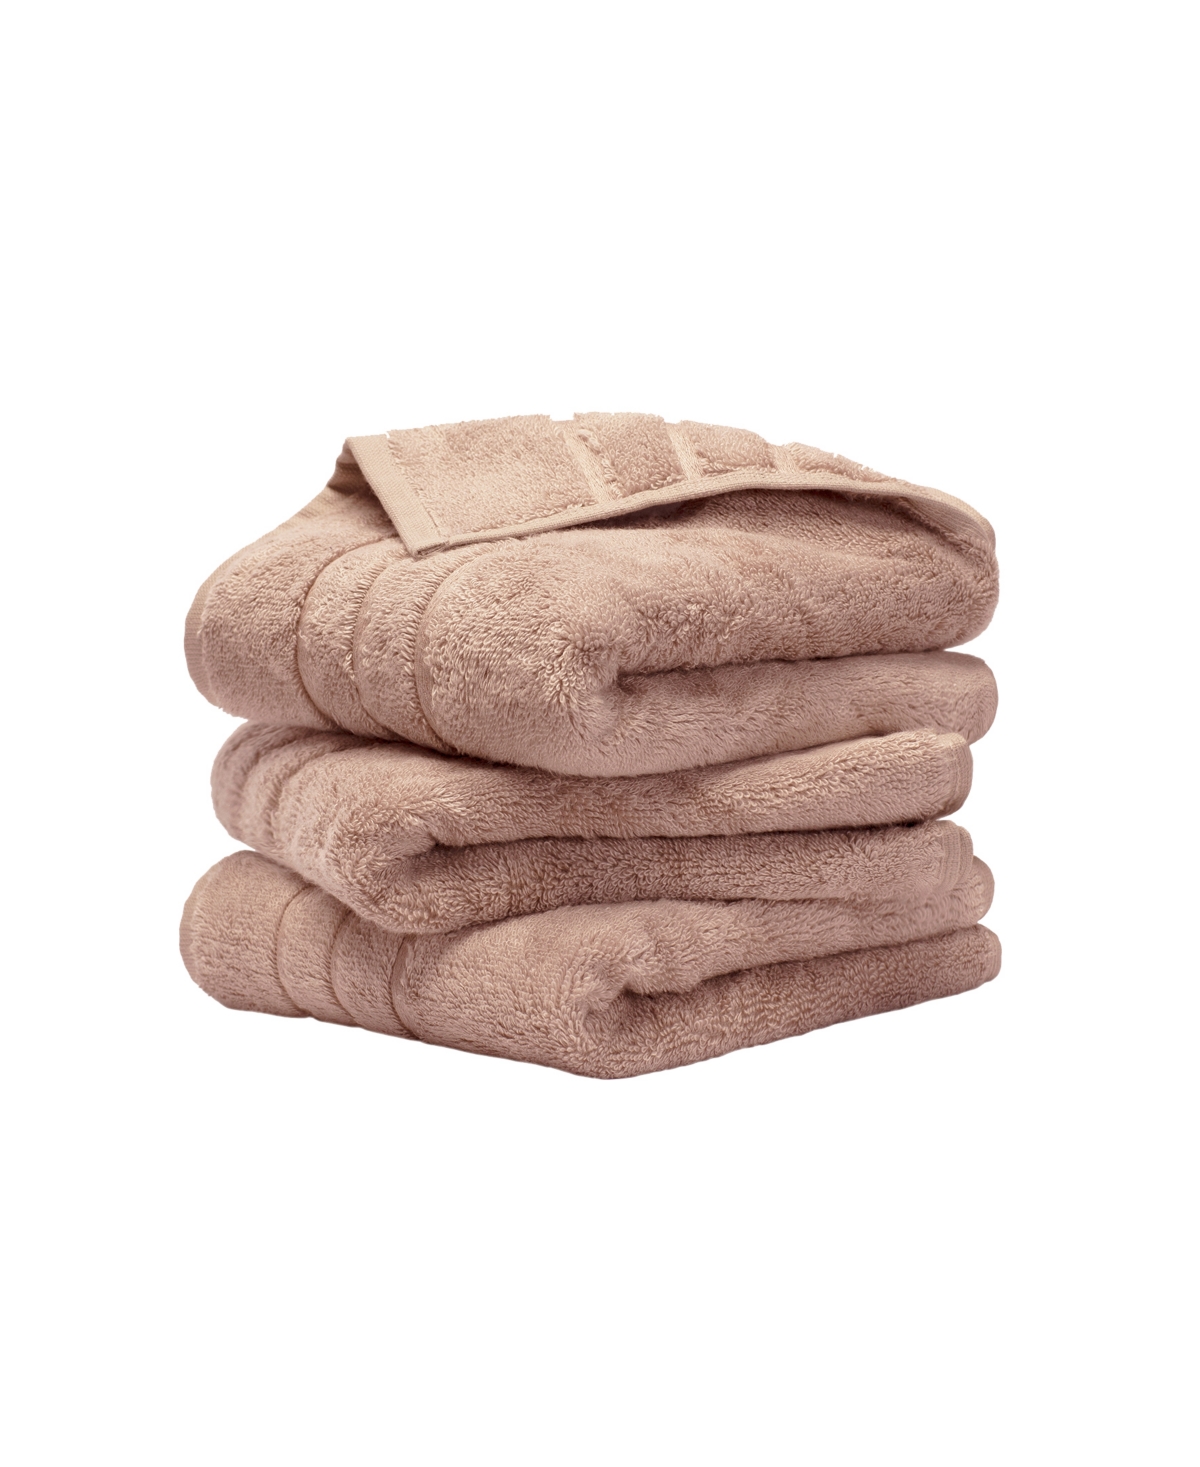 Cariloha 3-piece 30" X 16" Viscose From Bamboo Hand Towel Set Bedding In Blush